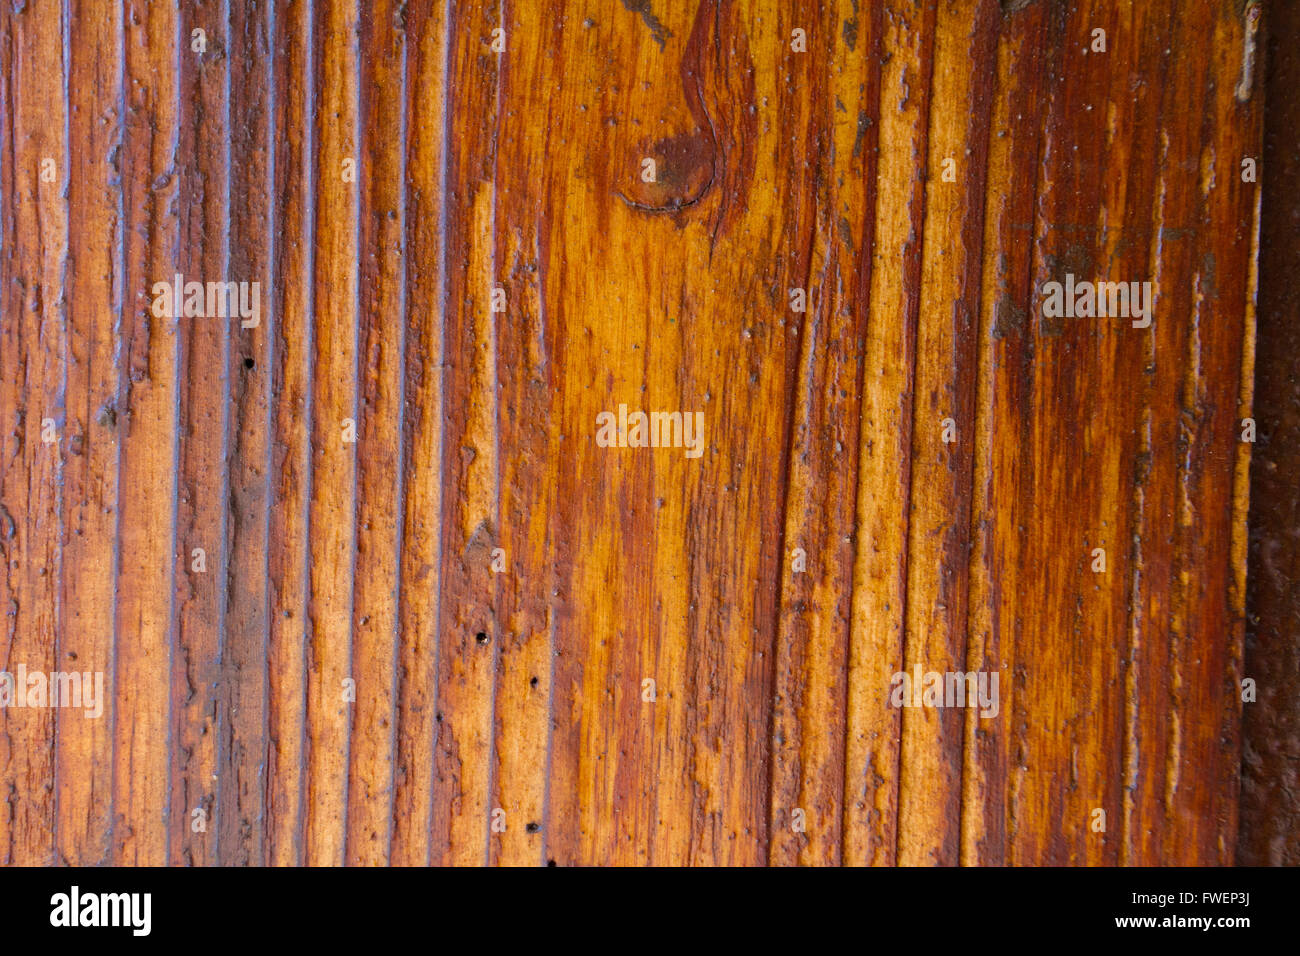 These vertical stripes are typical of this type of tropical wood on the island of Hawaii. This image is a nature detail backgrou Stock Photo